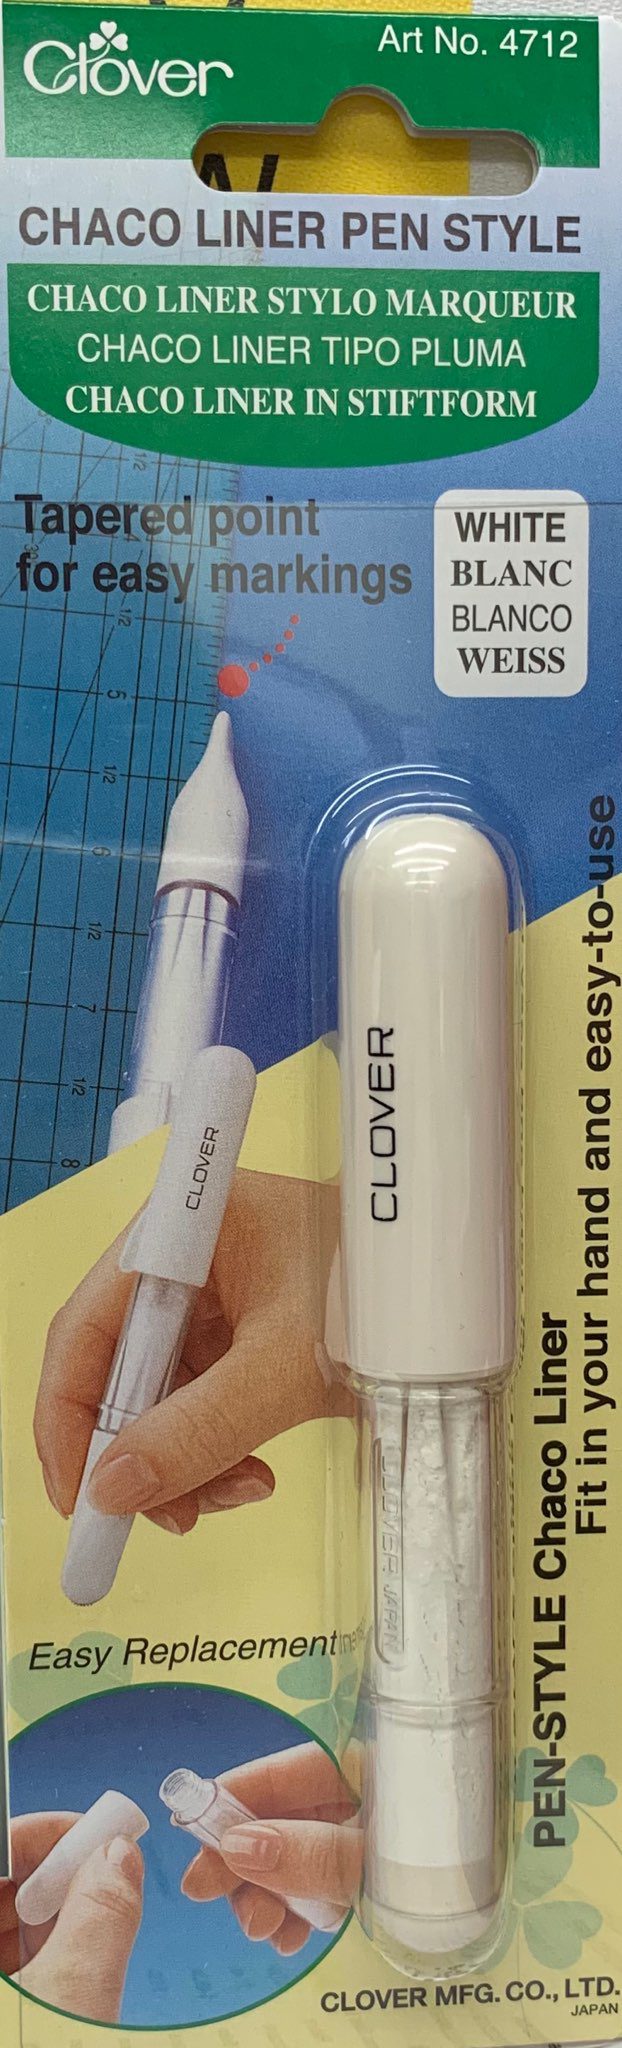 Clover - Chaco Liner Pen Style - White - Tapered Point for easy markings